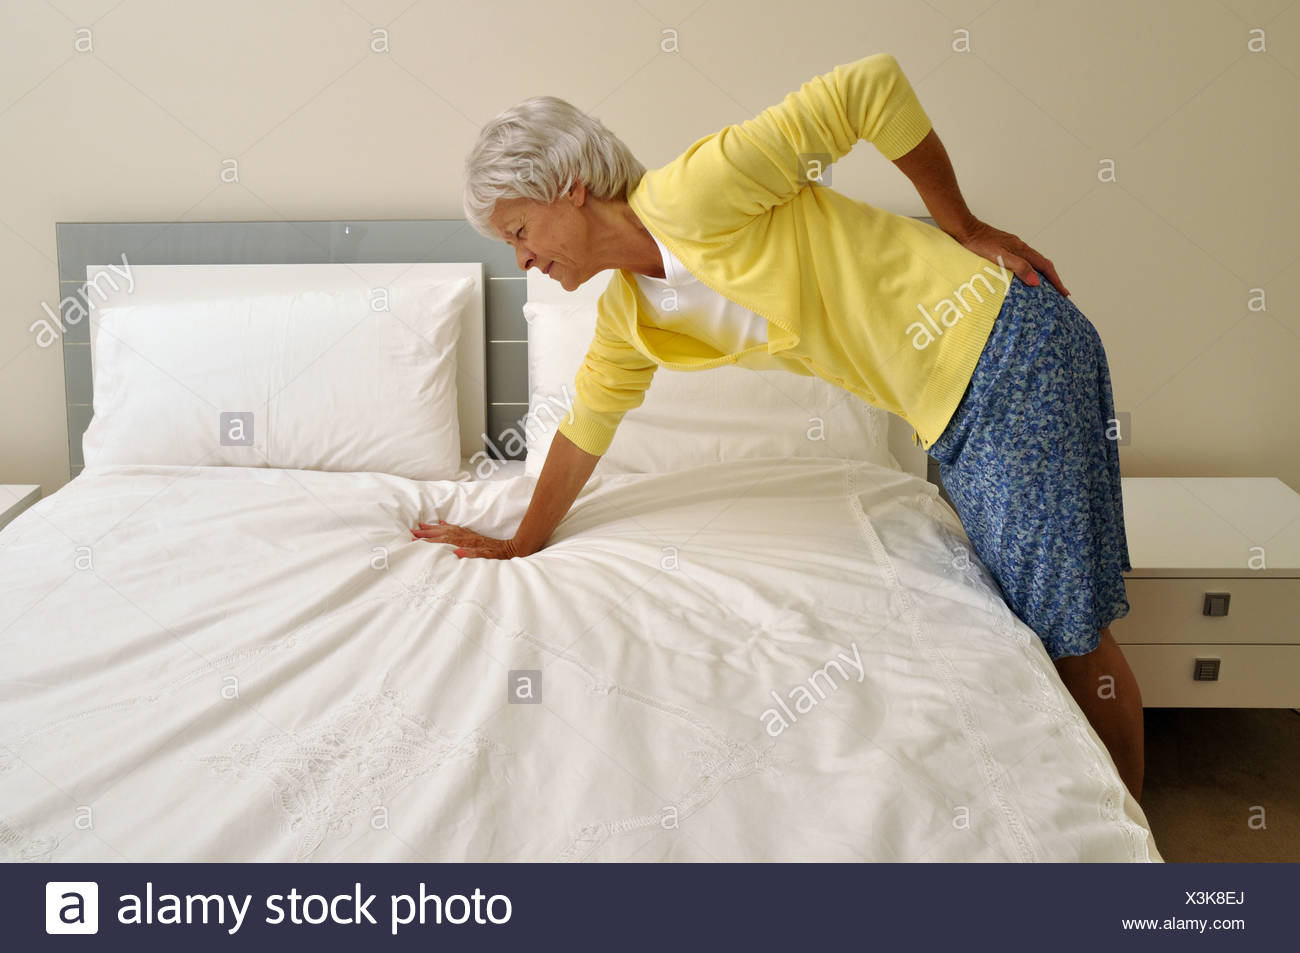 Back Pain Pensioner Senior Old Woman Mature Lumbago Hurt Pain Bedroom Making Bed Back Inside Medicine Stock Photo Alamy Layer clipping allows you to do it simply. https www alamy com back pain pensioner senior old woman mature lumbago hurt pain bedroom making bed back inside medicine image277633626 html